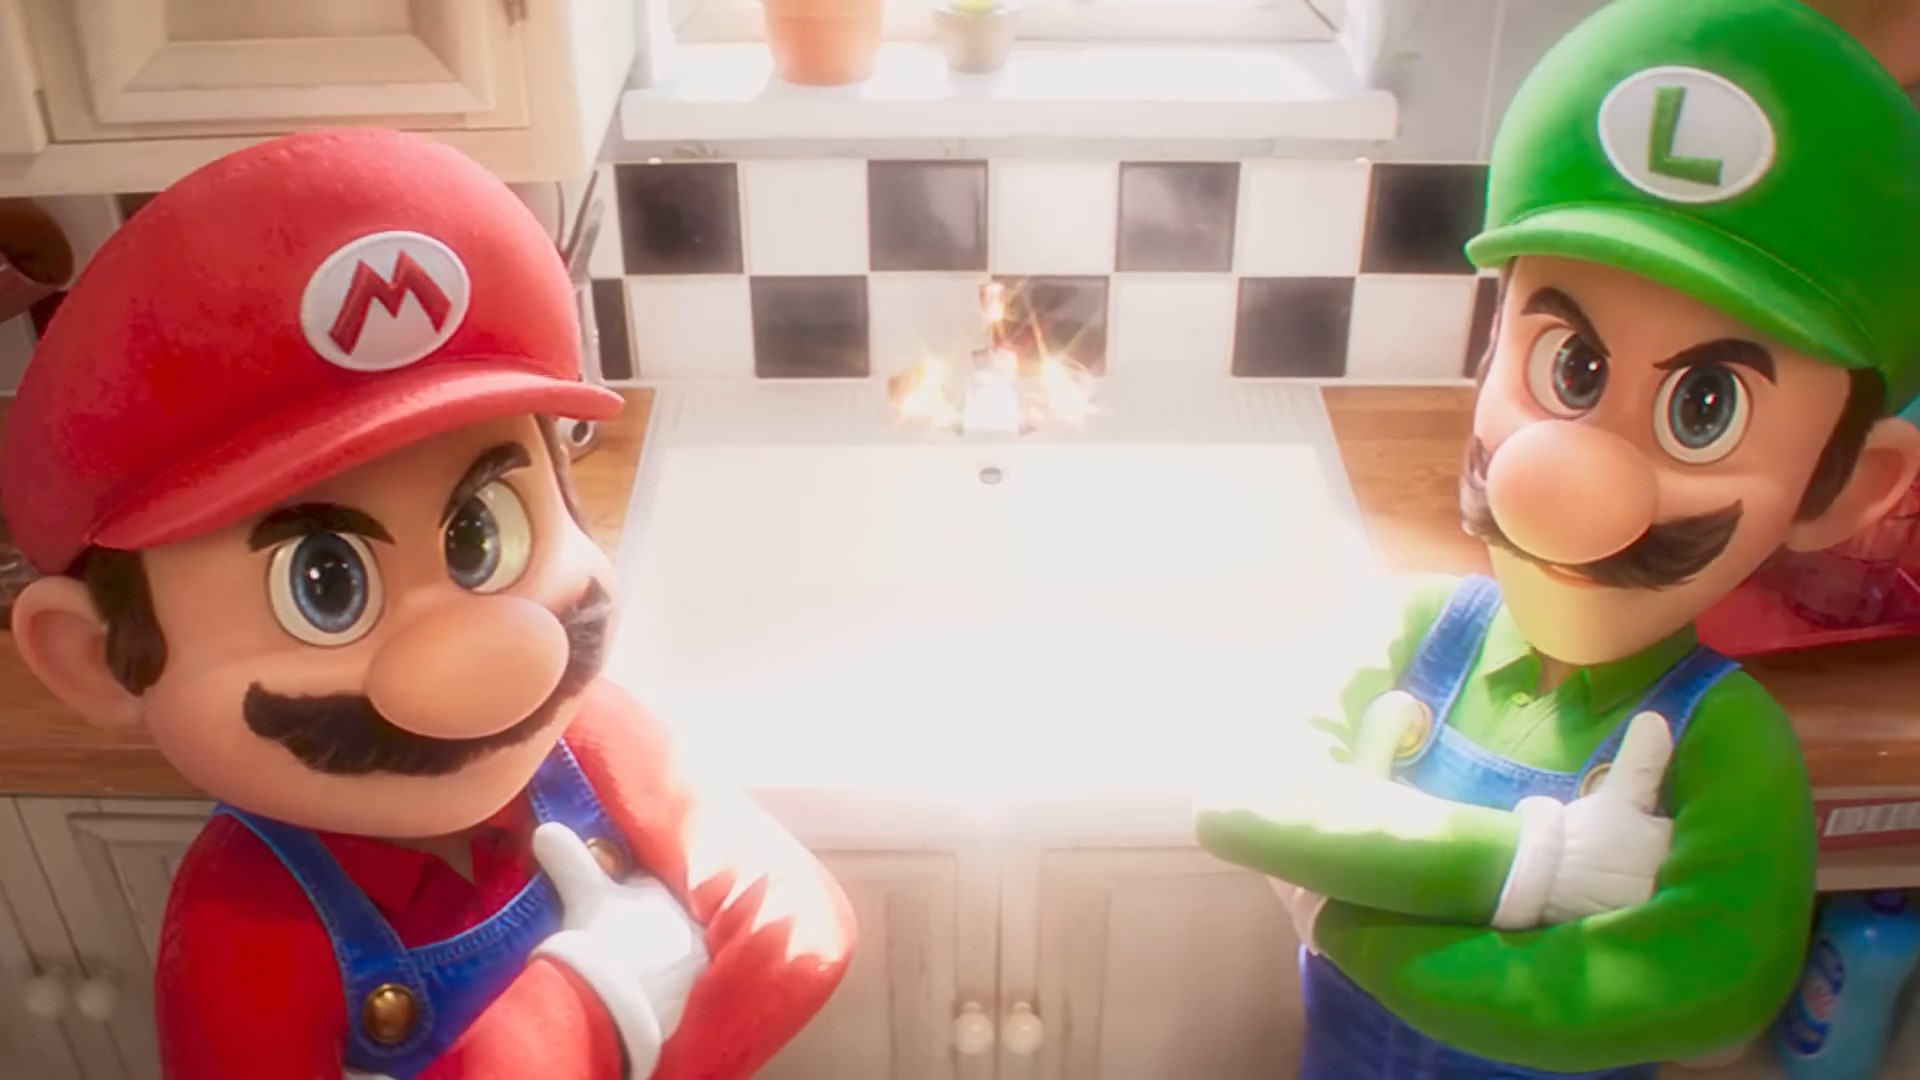 Nintendo teases Super Mario Odyssey multiplayer, but we'll have to